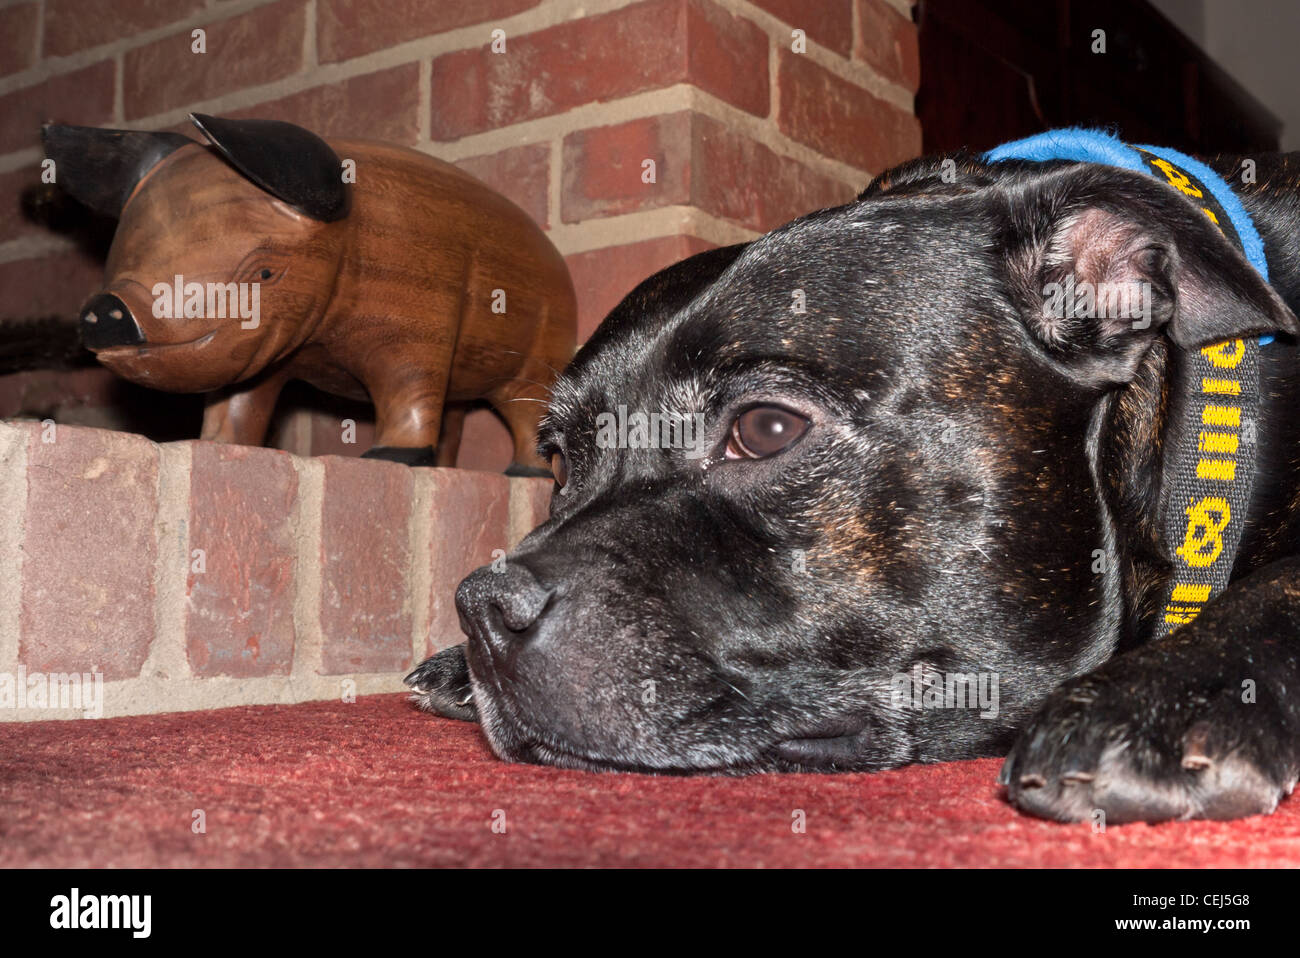 Staffordshire Bull Terrier and wooden pig both looking the same way. Stock Photo